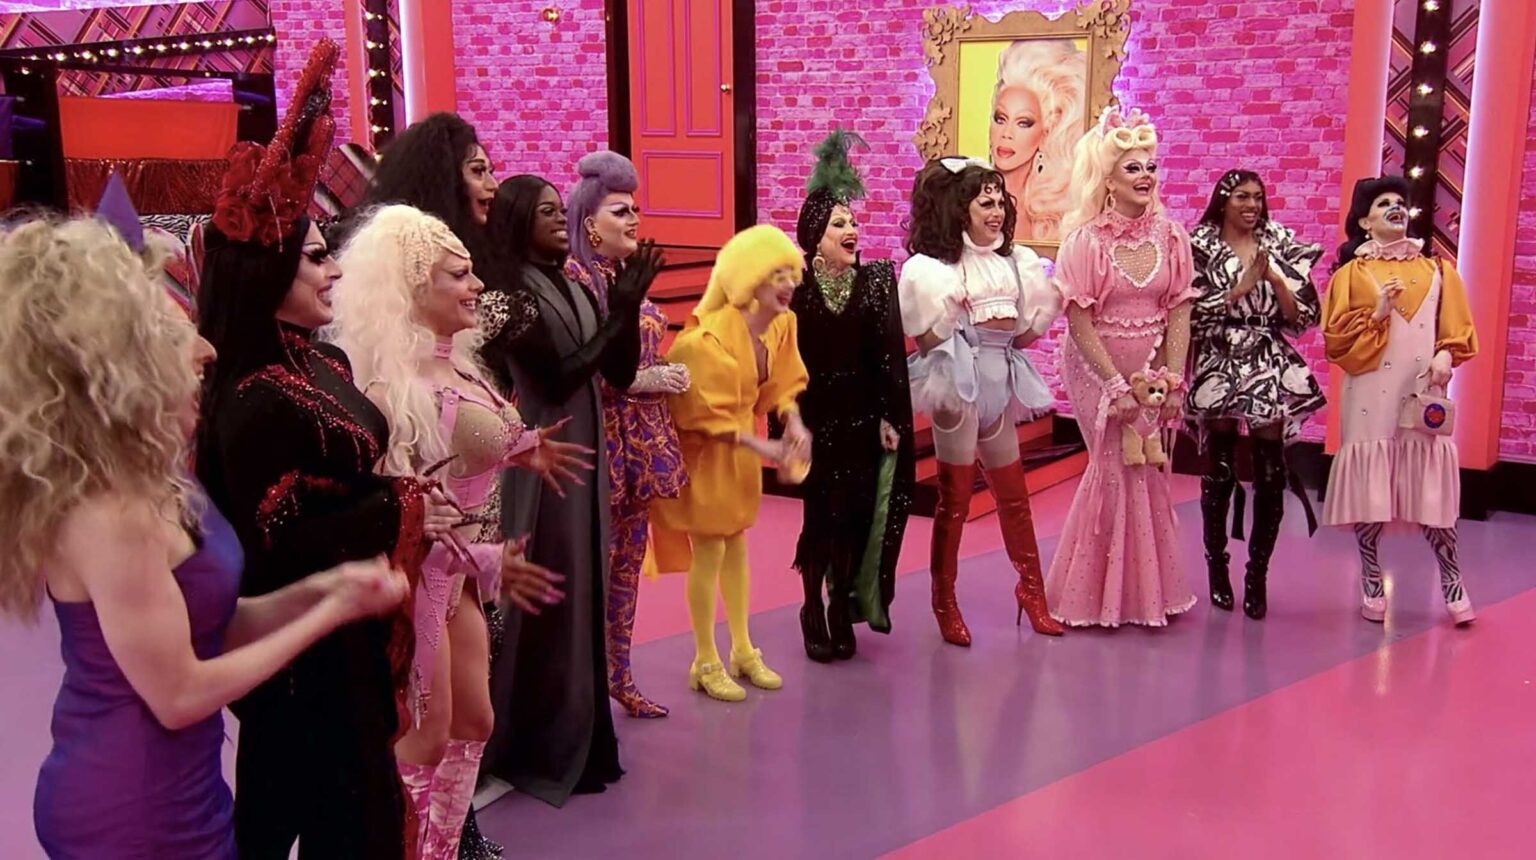 The dreaded design challenge has come to 'Drag Race UK' with an ugly twist. Let us recap the lewks and see which queen *truly* wore it better.